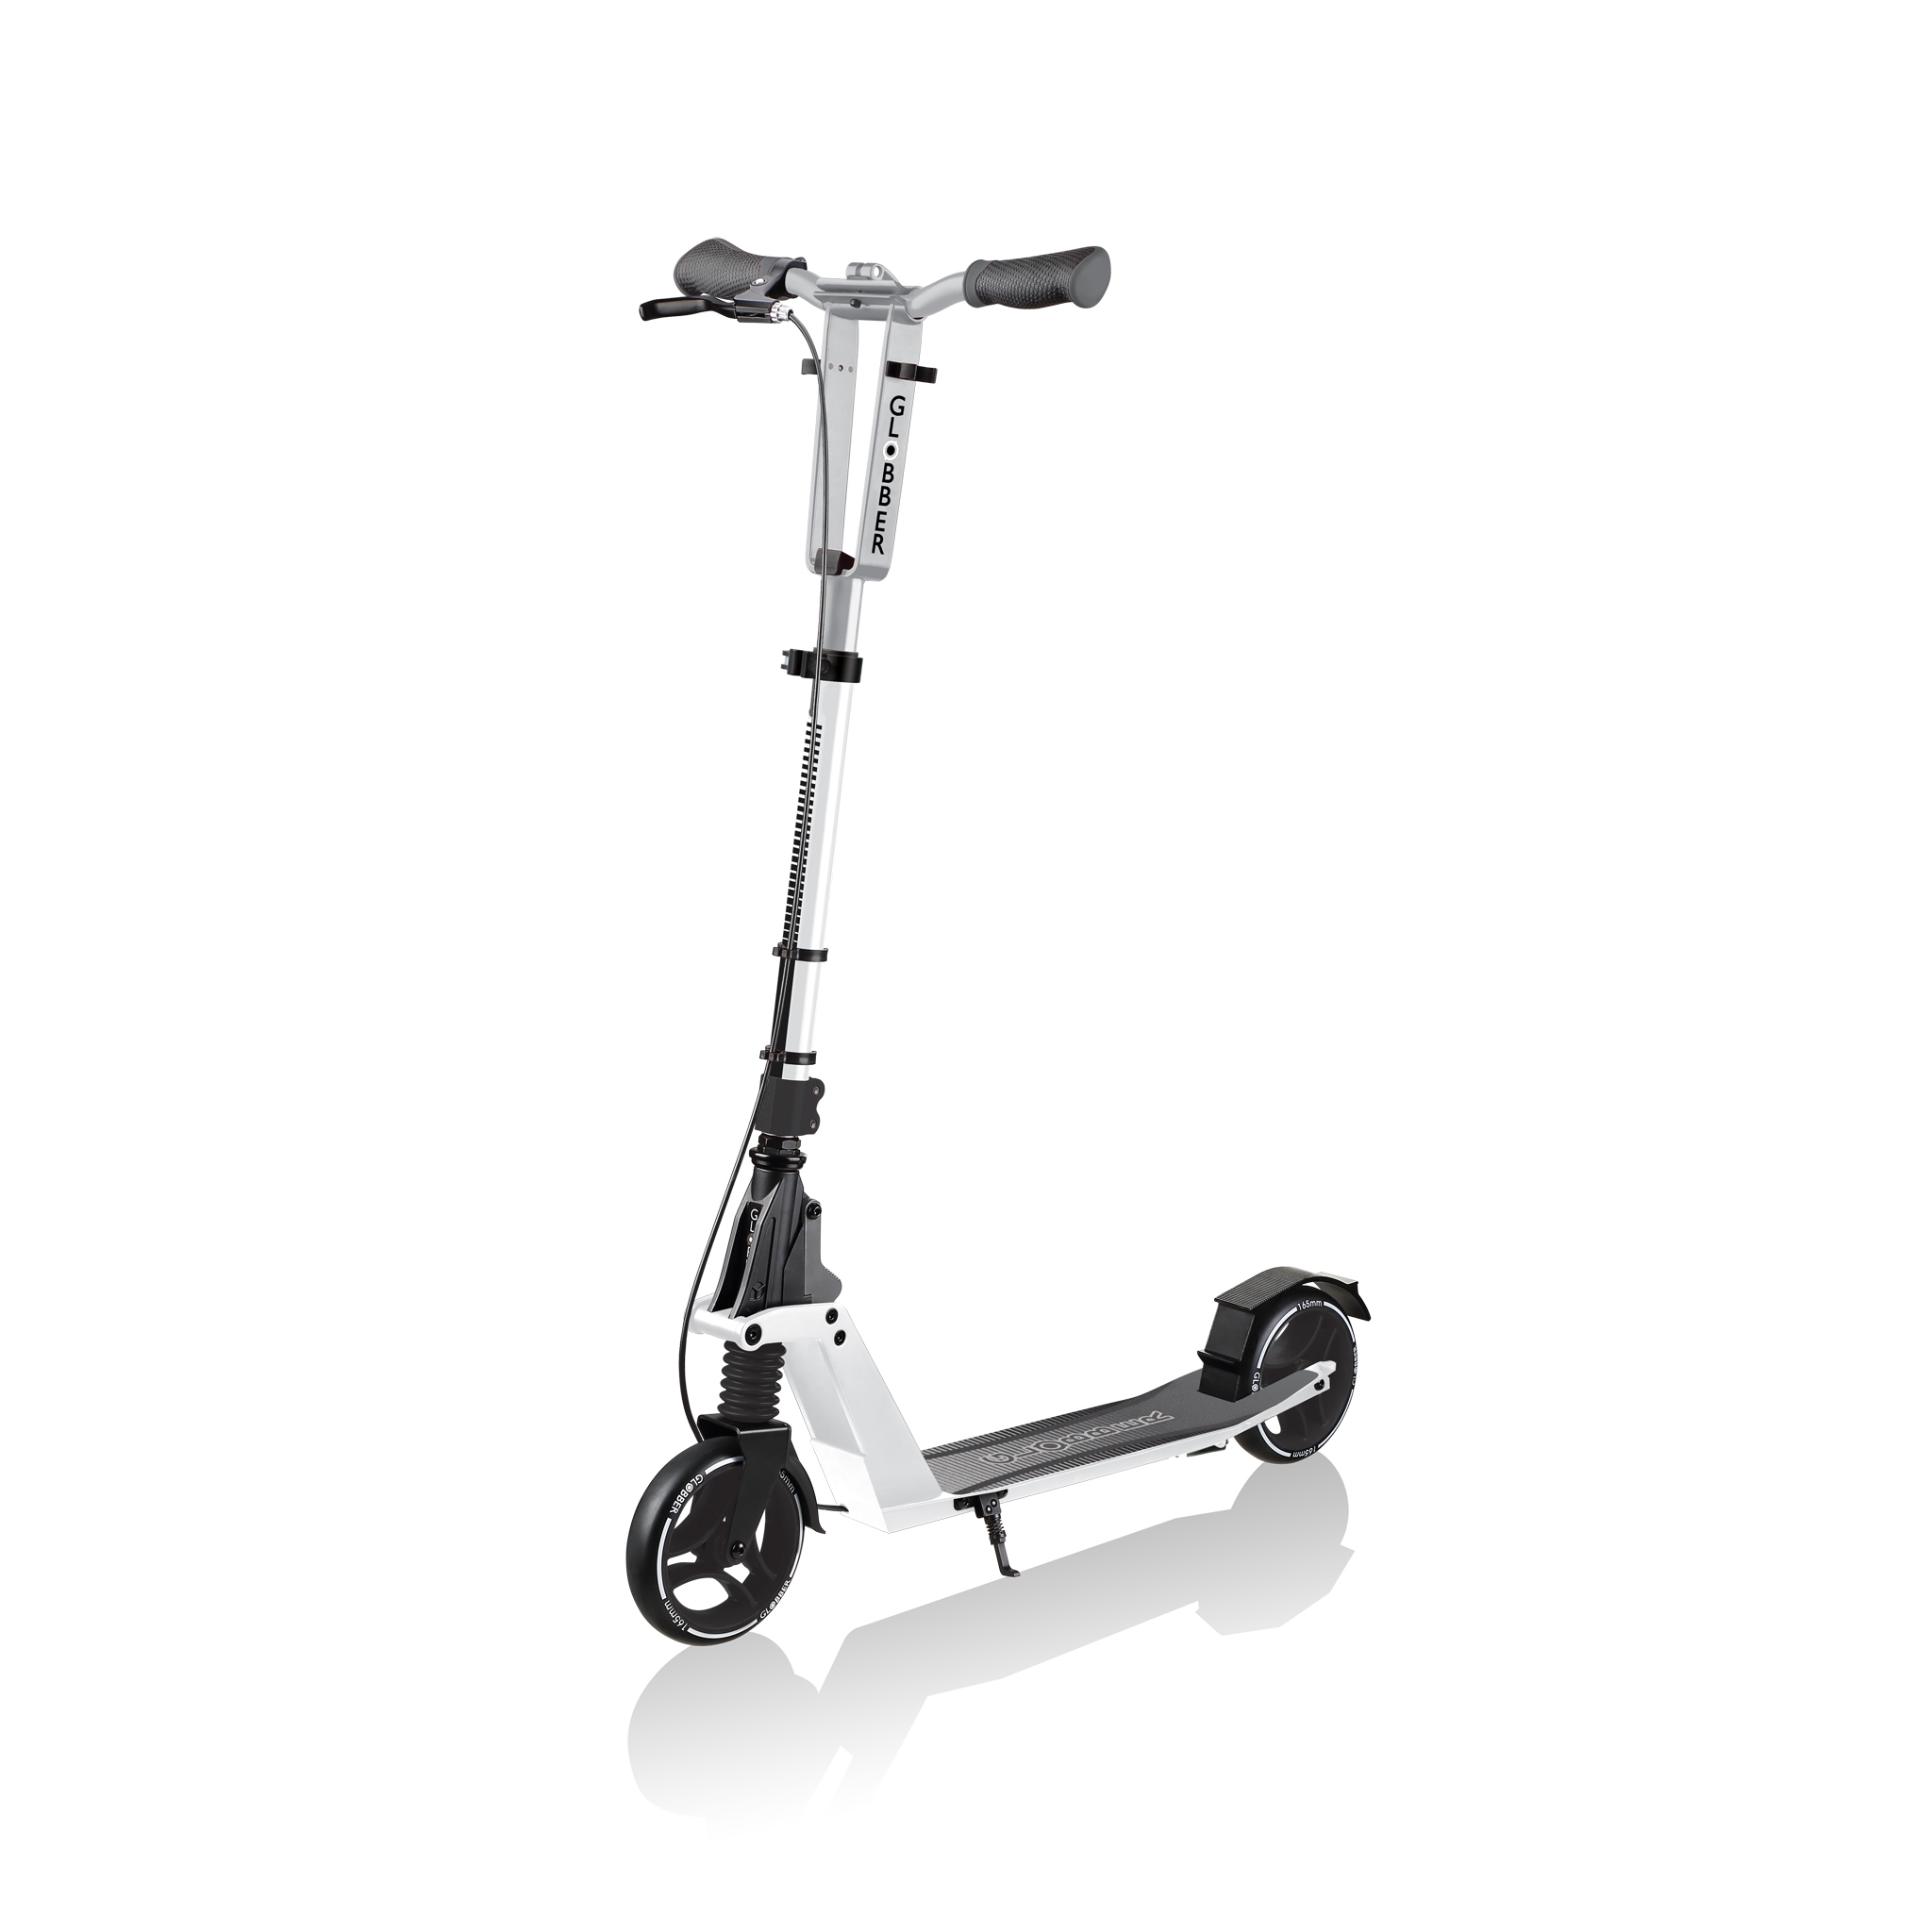 ONE-K-165-BR-award-winning-2-wheel-foldable-scooter-for-teens-and-adults-aged-14-and-above_white 0